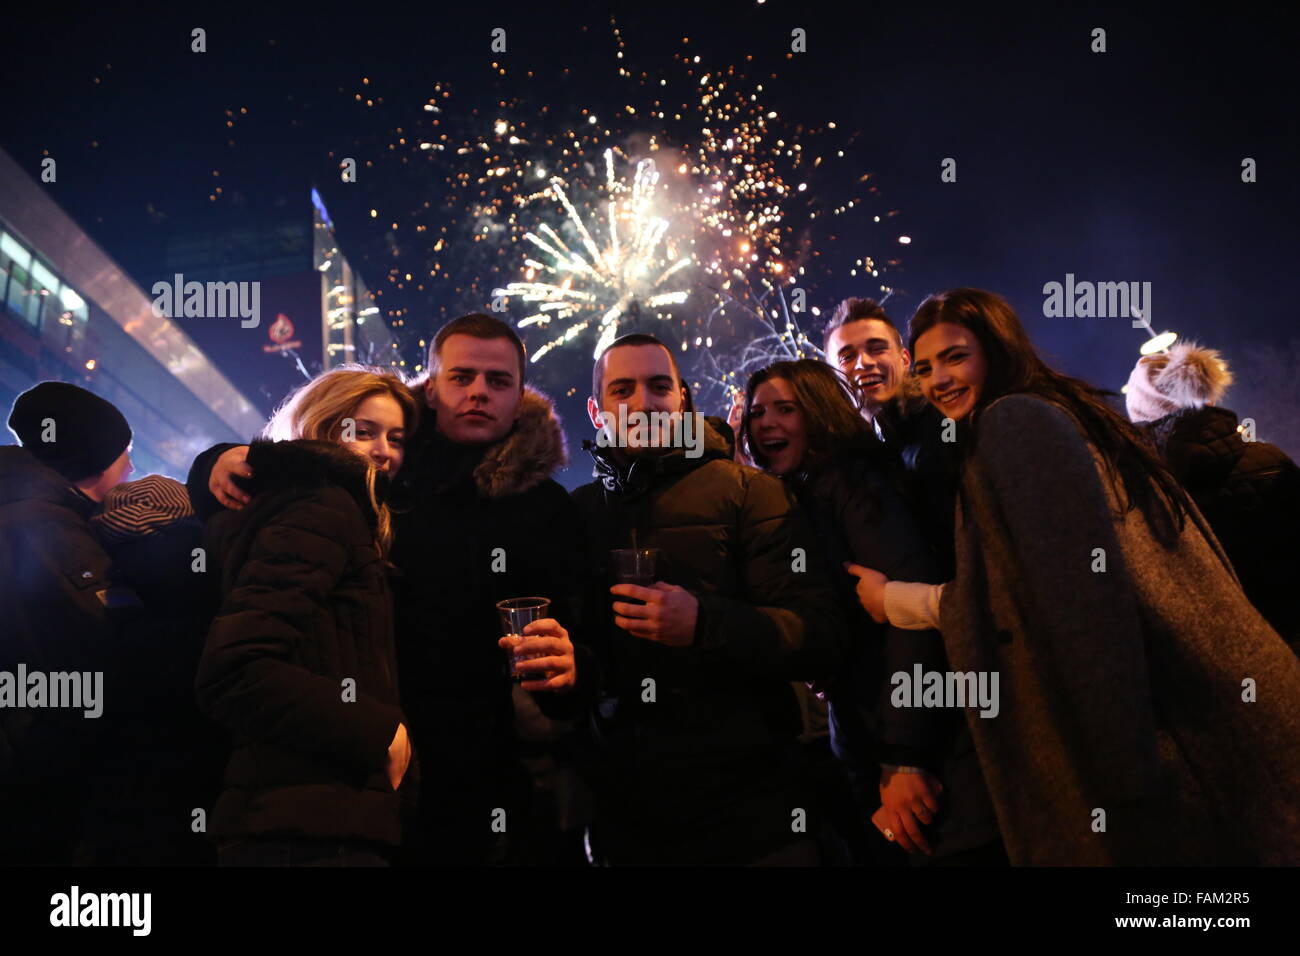 Sarajevo, Bosnia-Herzegovina. 31st Dec, 2015. People attend a concert to celebrate the New Year at the BBI Square in central Sarajevo, Bosnia-Herzegovina, Dec. 31, 2015. Sarajevo residents and tourists traditionally welcome the New Year on the streets of the city. Credit:  Haris Memija/Xinhua/Alamy Live News Stock Photo